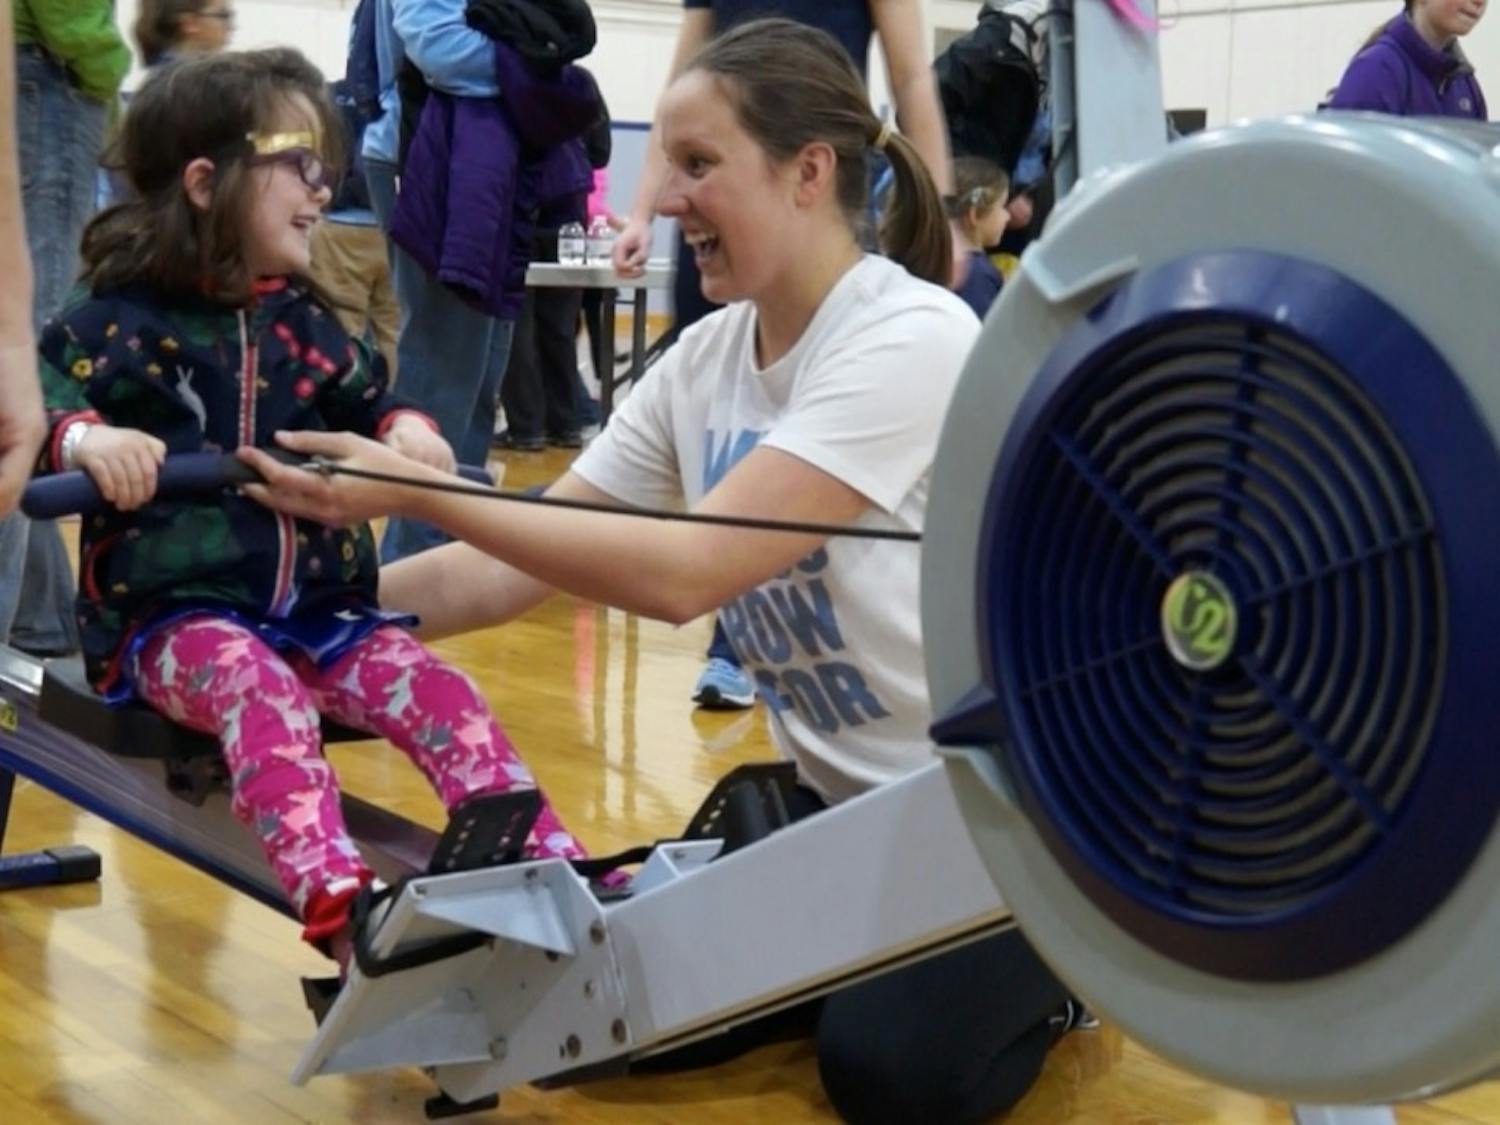 Caroline Young, who is on UNC's women's rowing team, teaches a young girl how to row during National Girls and Women in Sports Day hosted at UNC.